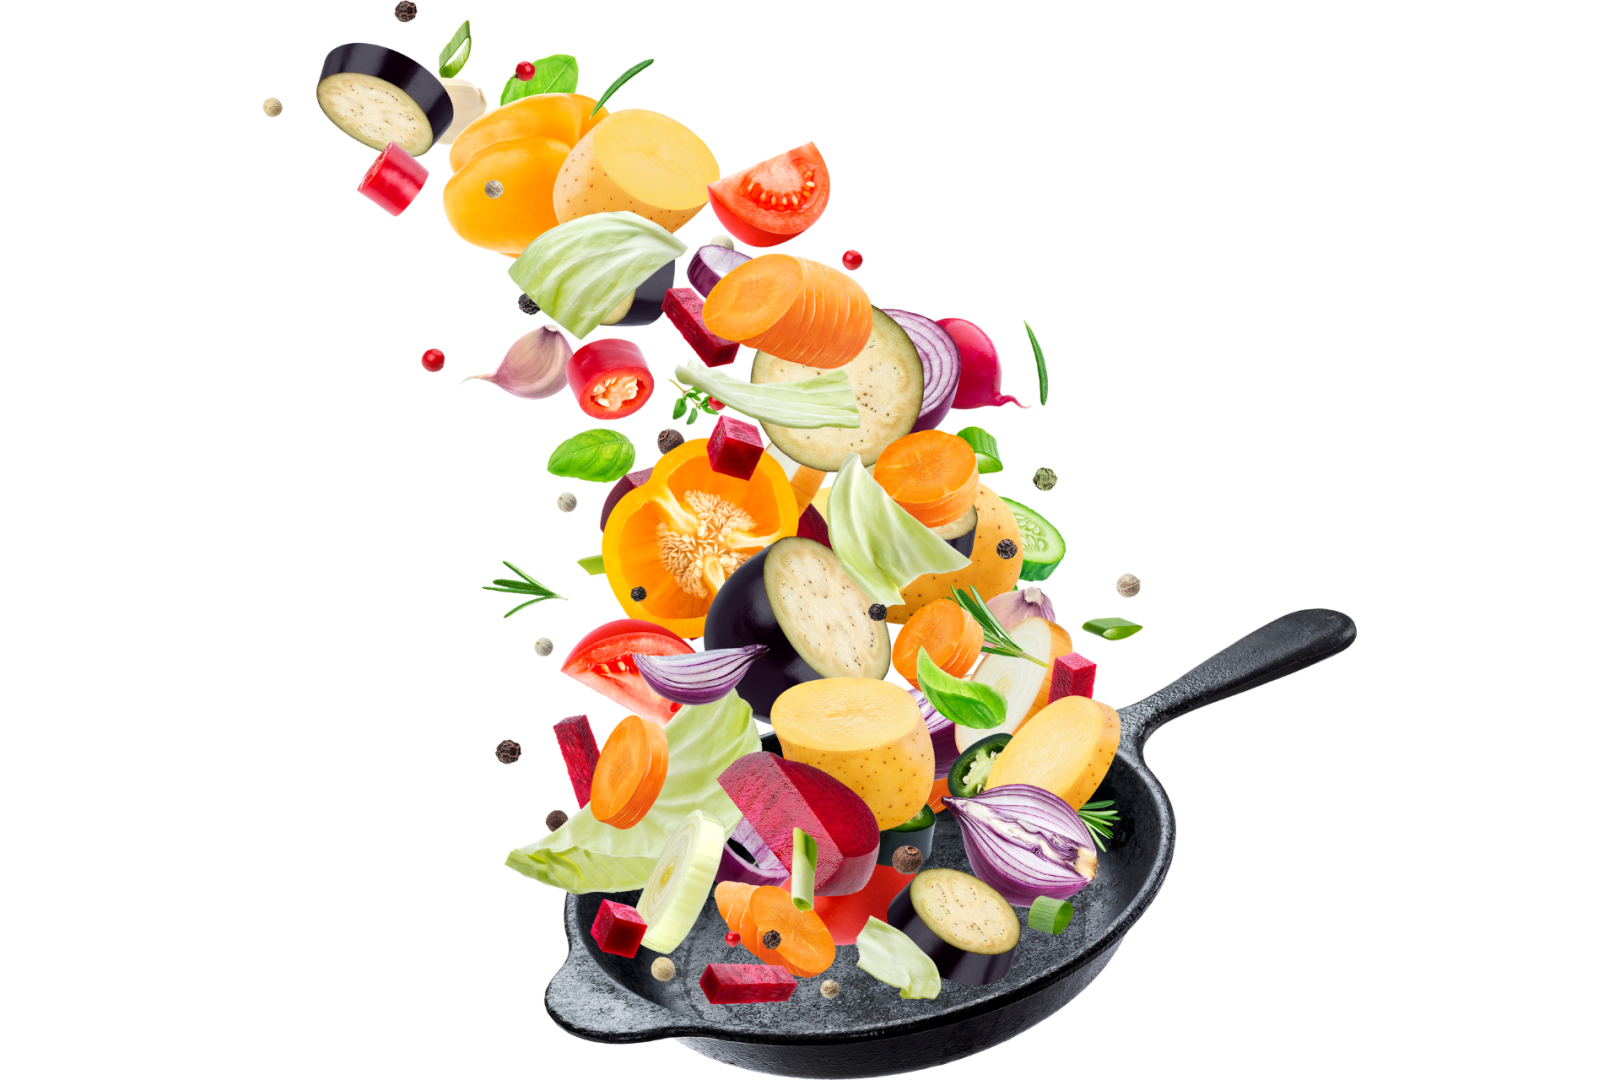 A black skillet with chopped fruits and vegetables that appear to be flying into it.